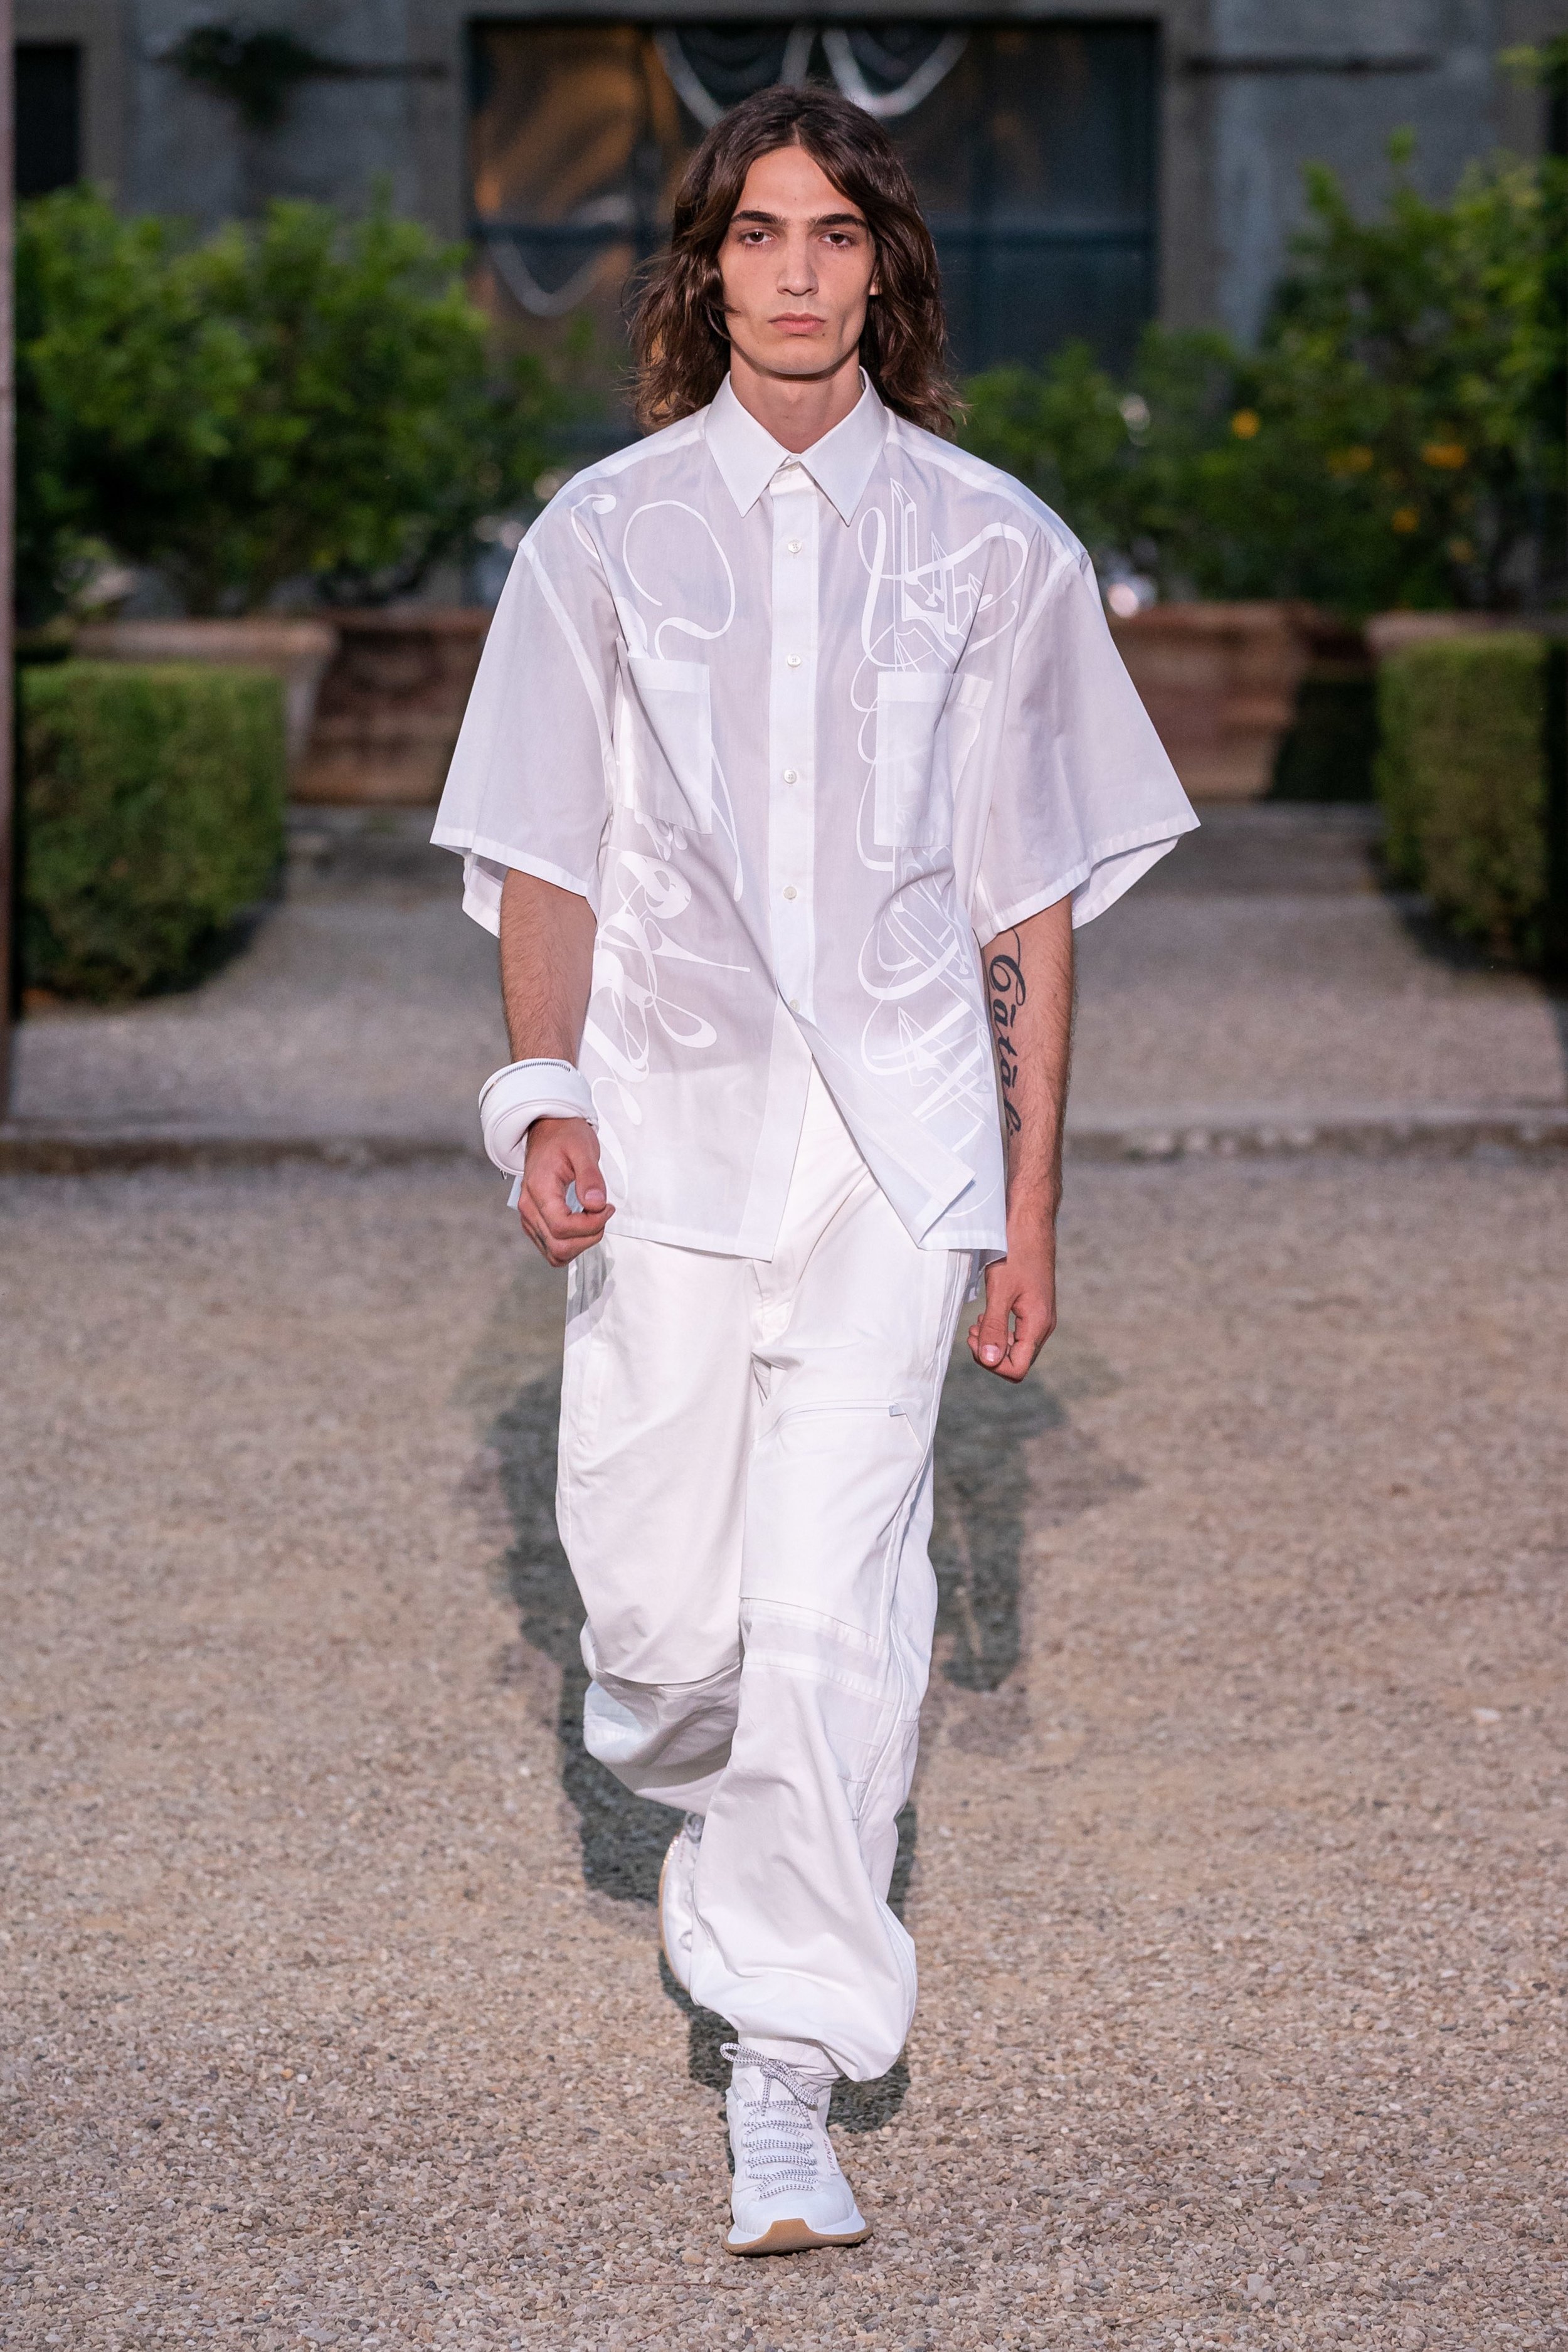 Behind_The_Blinds_Magazine_Givenchy_Men_SS20_Pitti_ALE0450.jpg